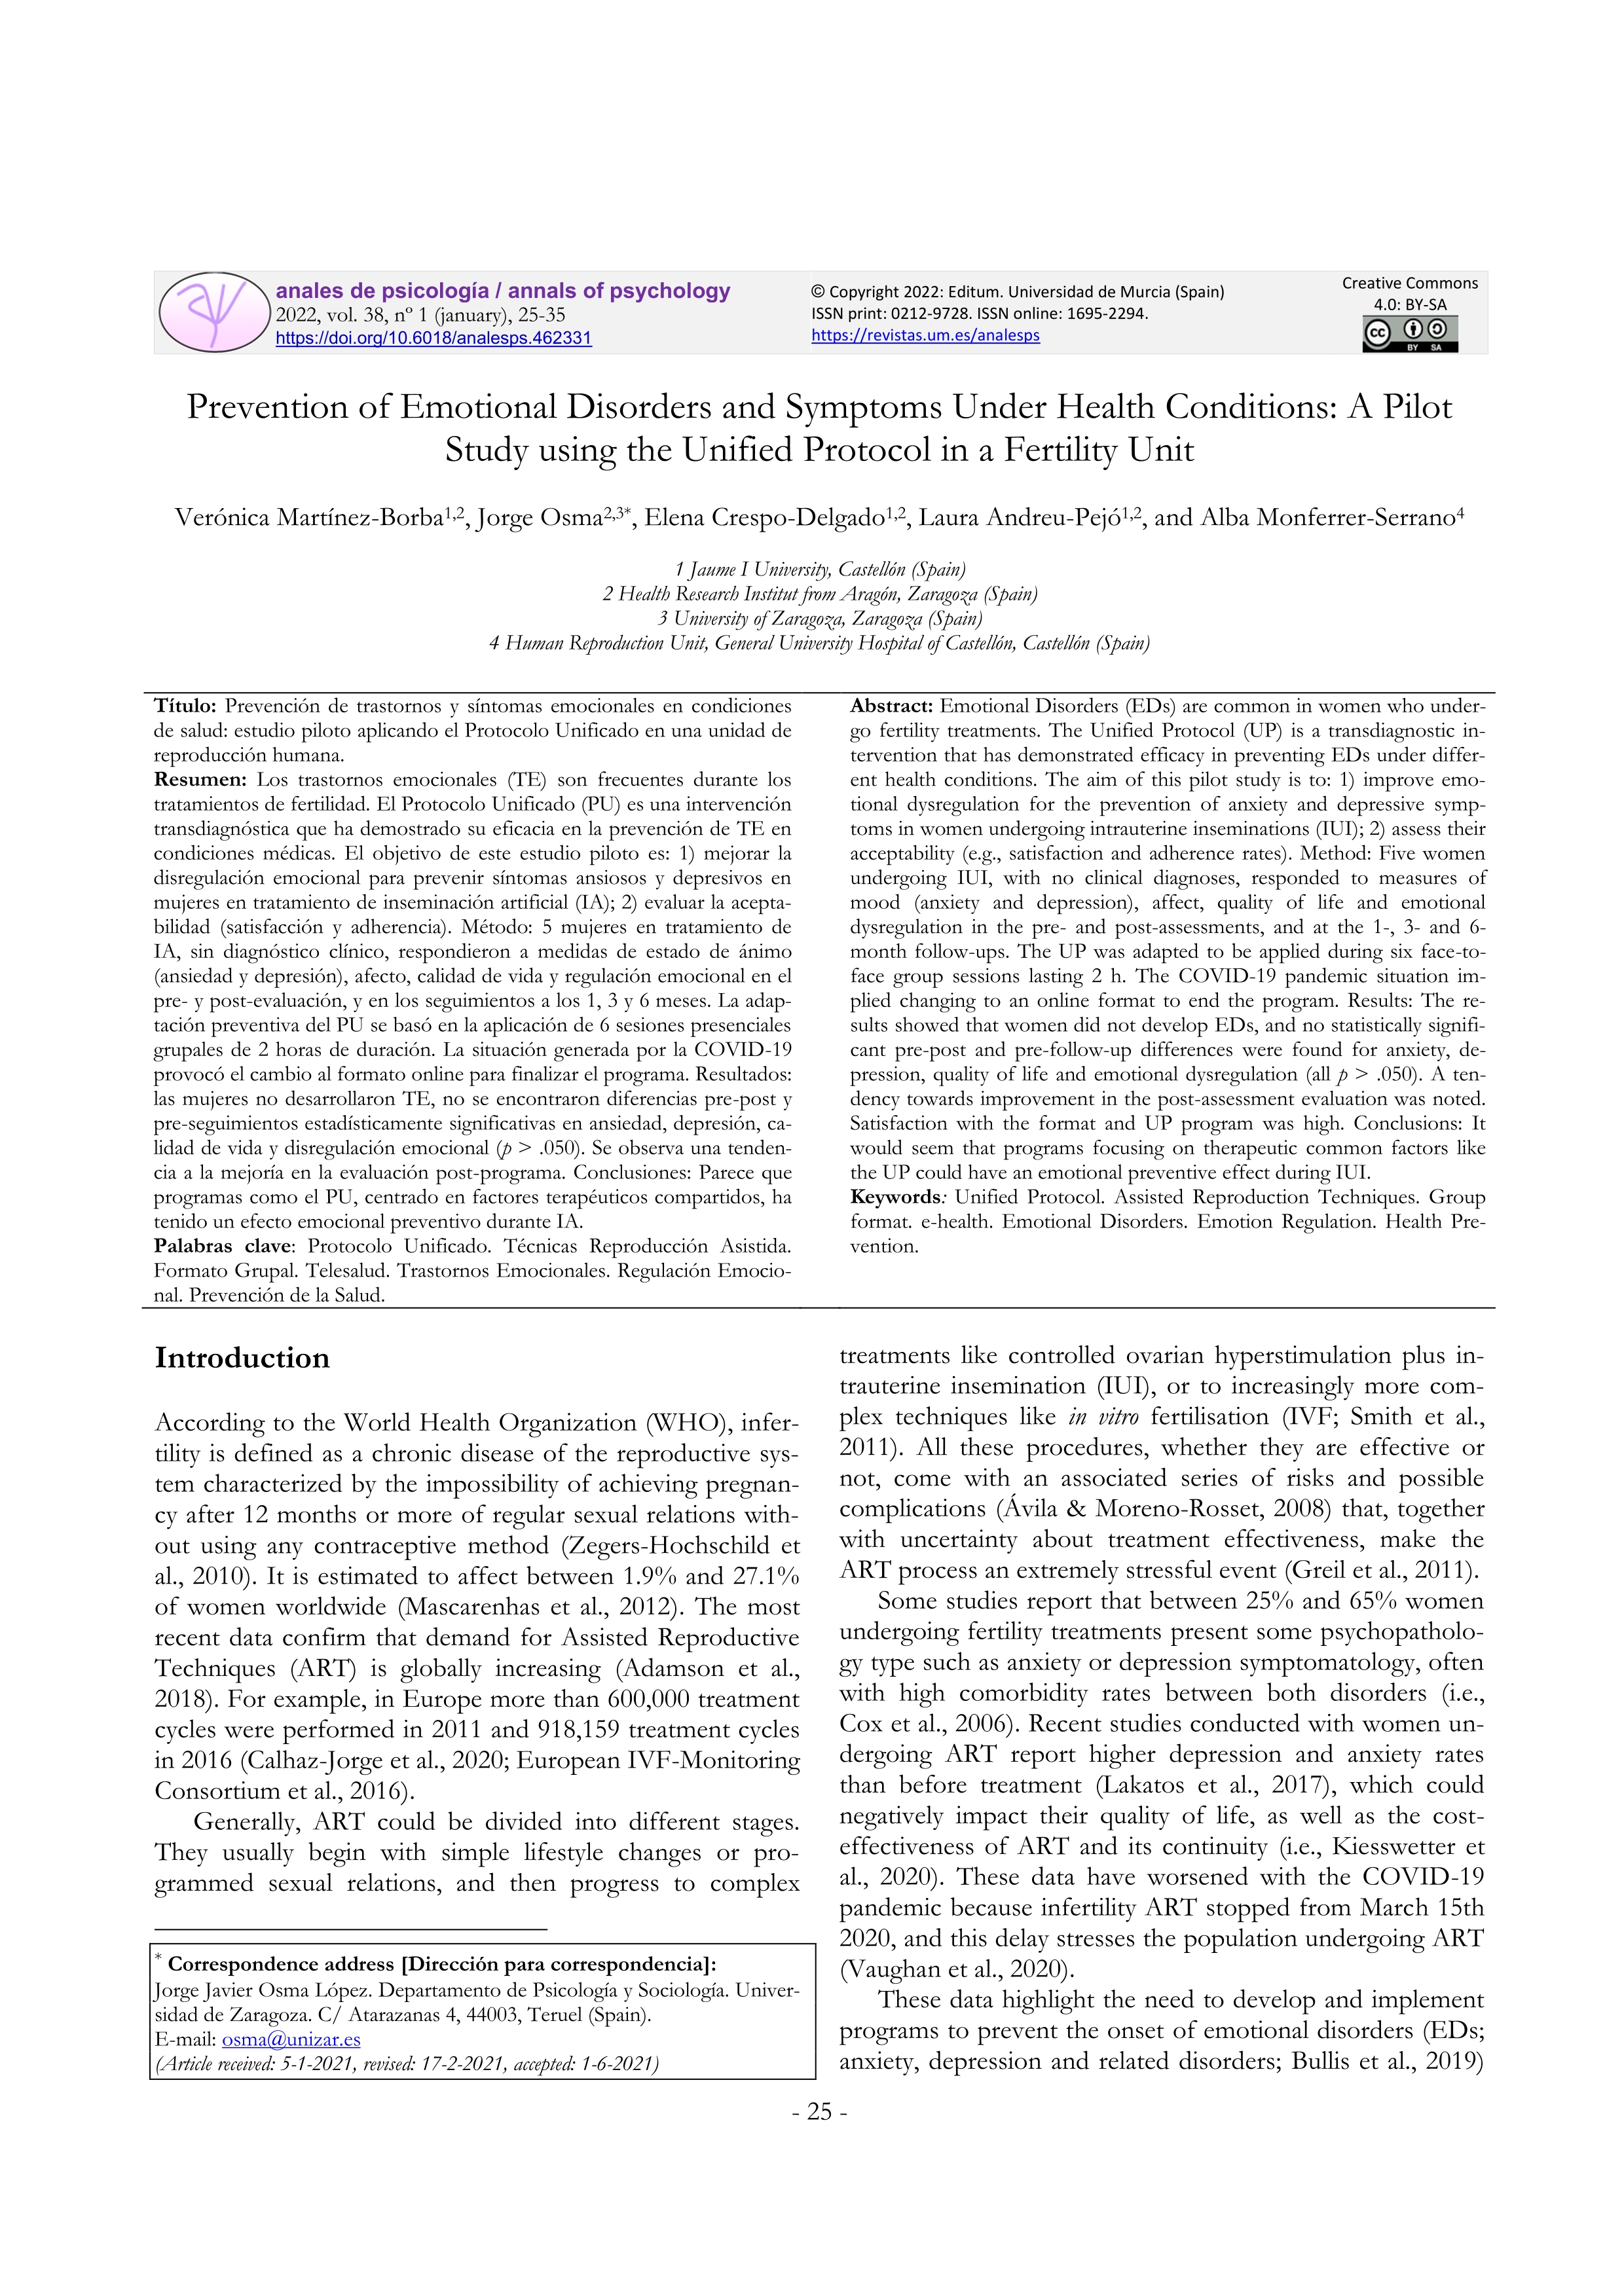 Prevention of Emotional Disorders and Symptoms Under Health Conditions: A Pilot Study using the Unified Protocol in a Fertility Unit